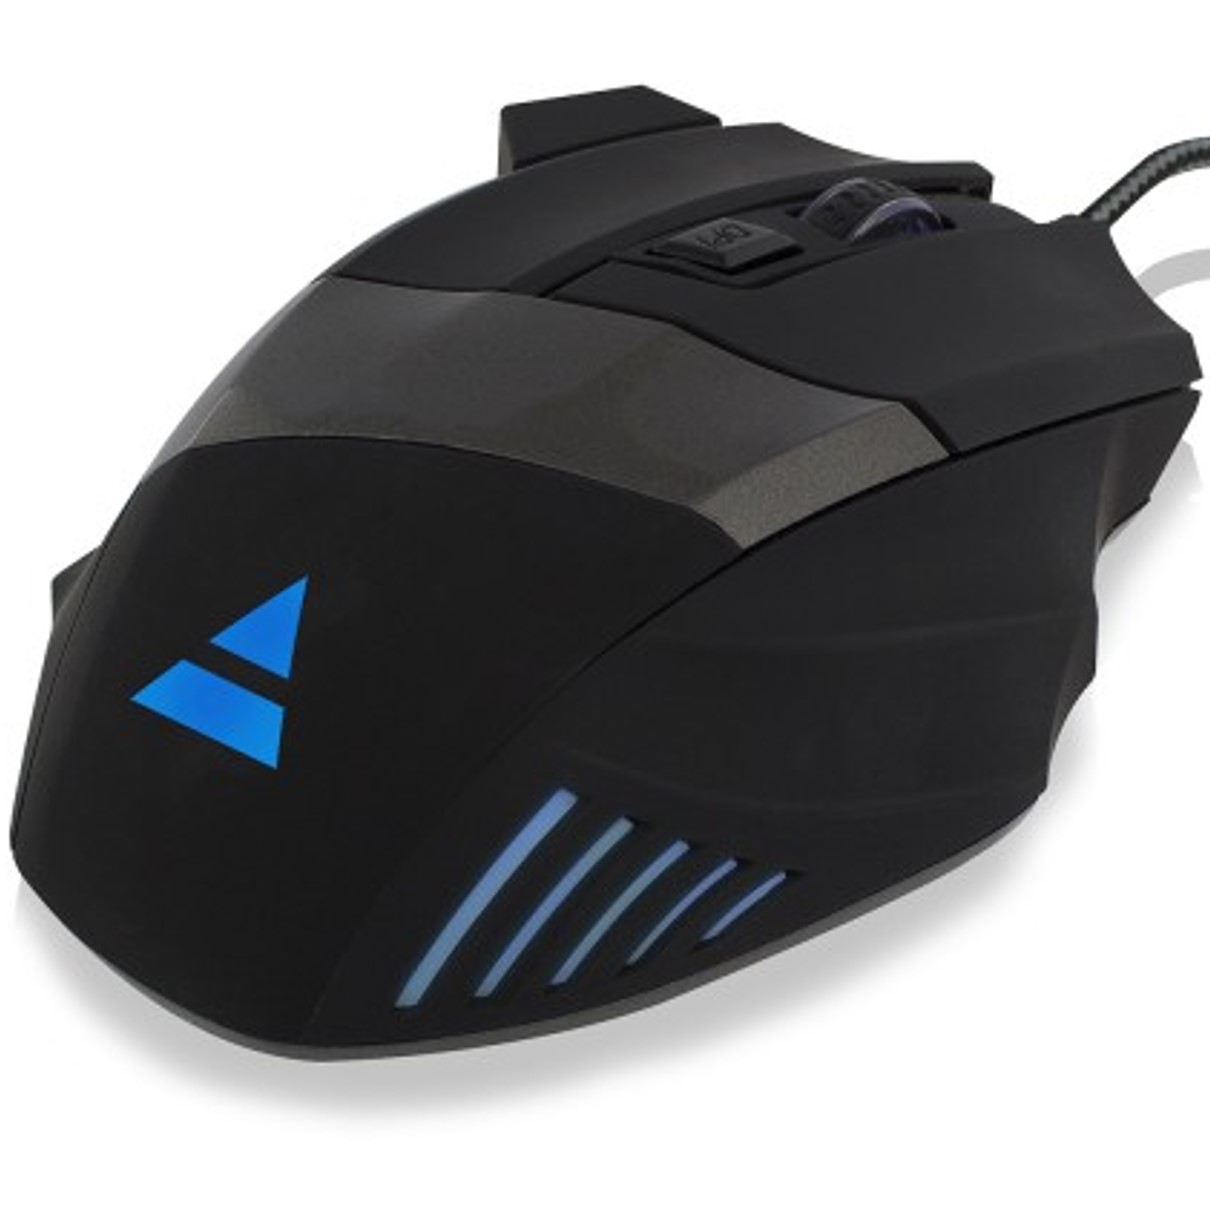 Mouse raton gaming ewent...